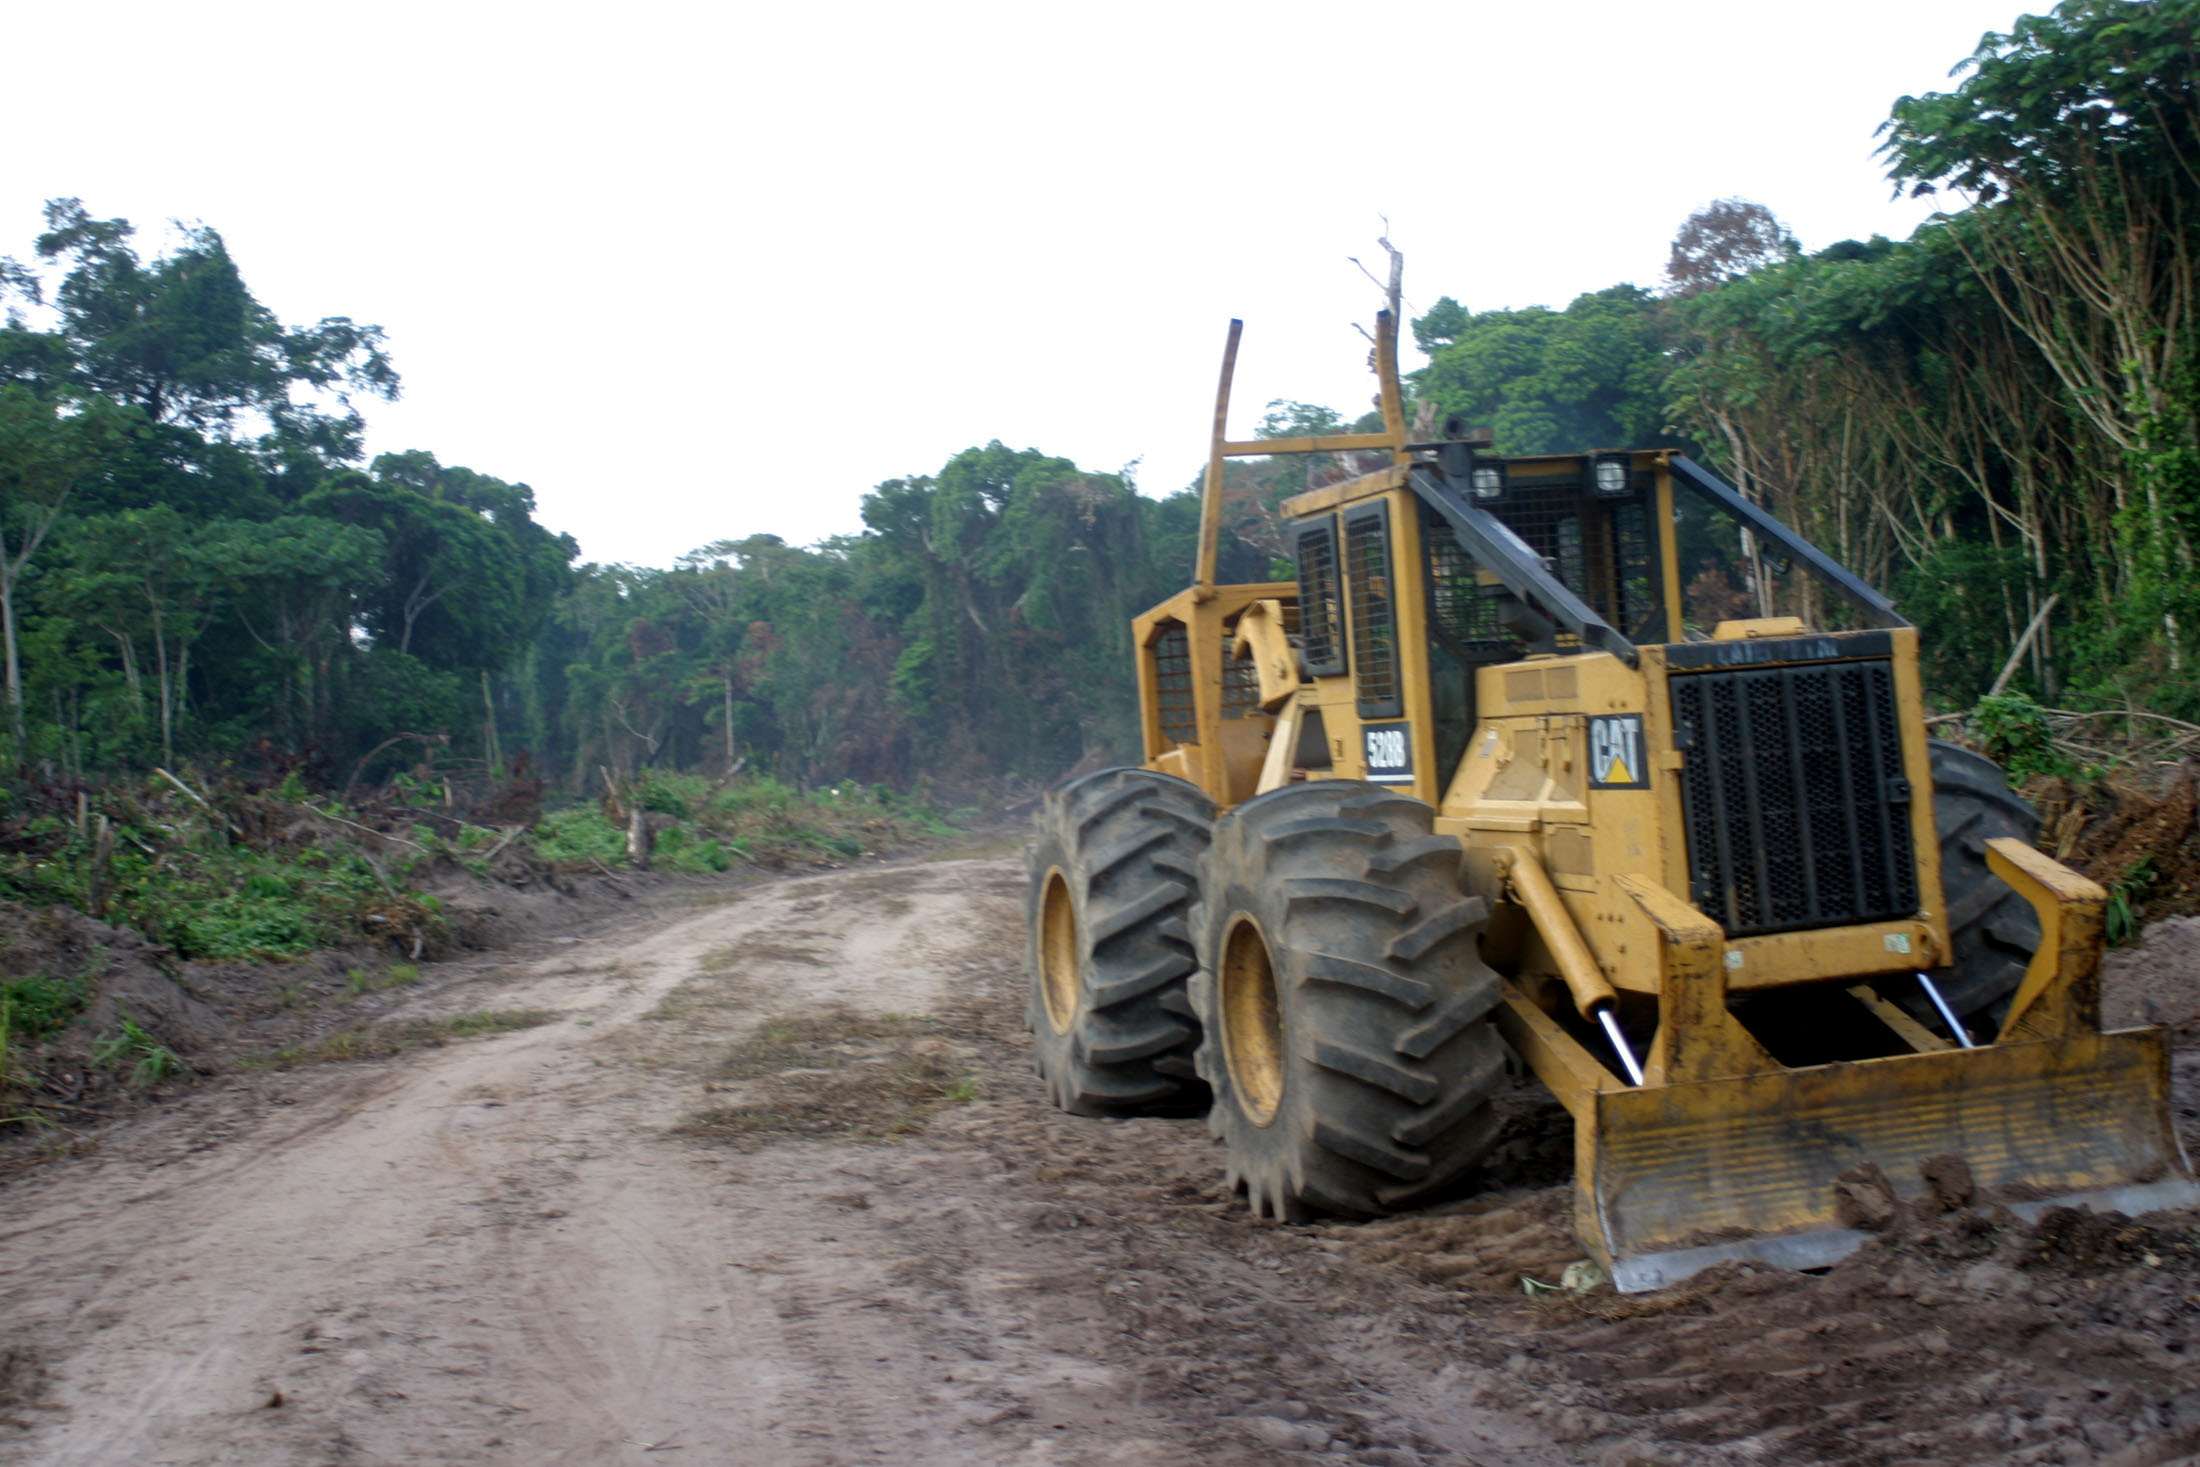 Logging company's tractor sits on the side of a road in Equateur